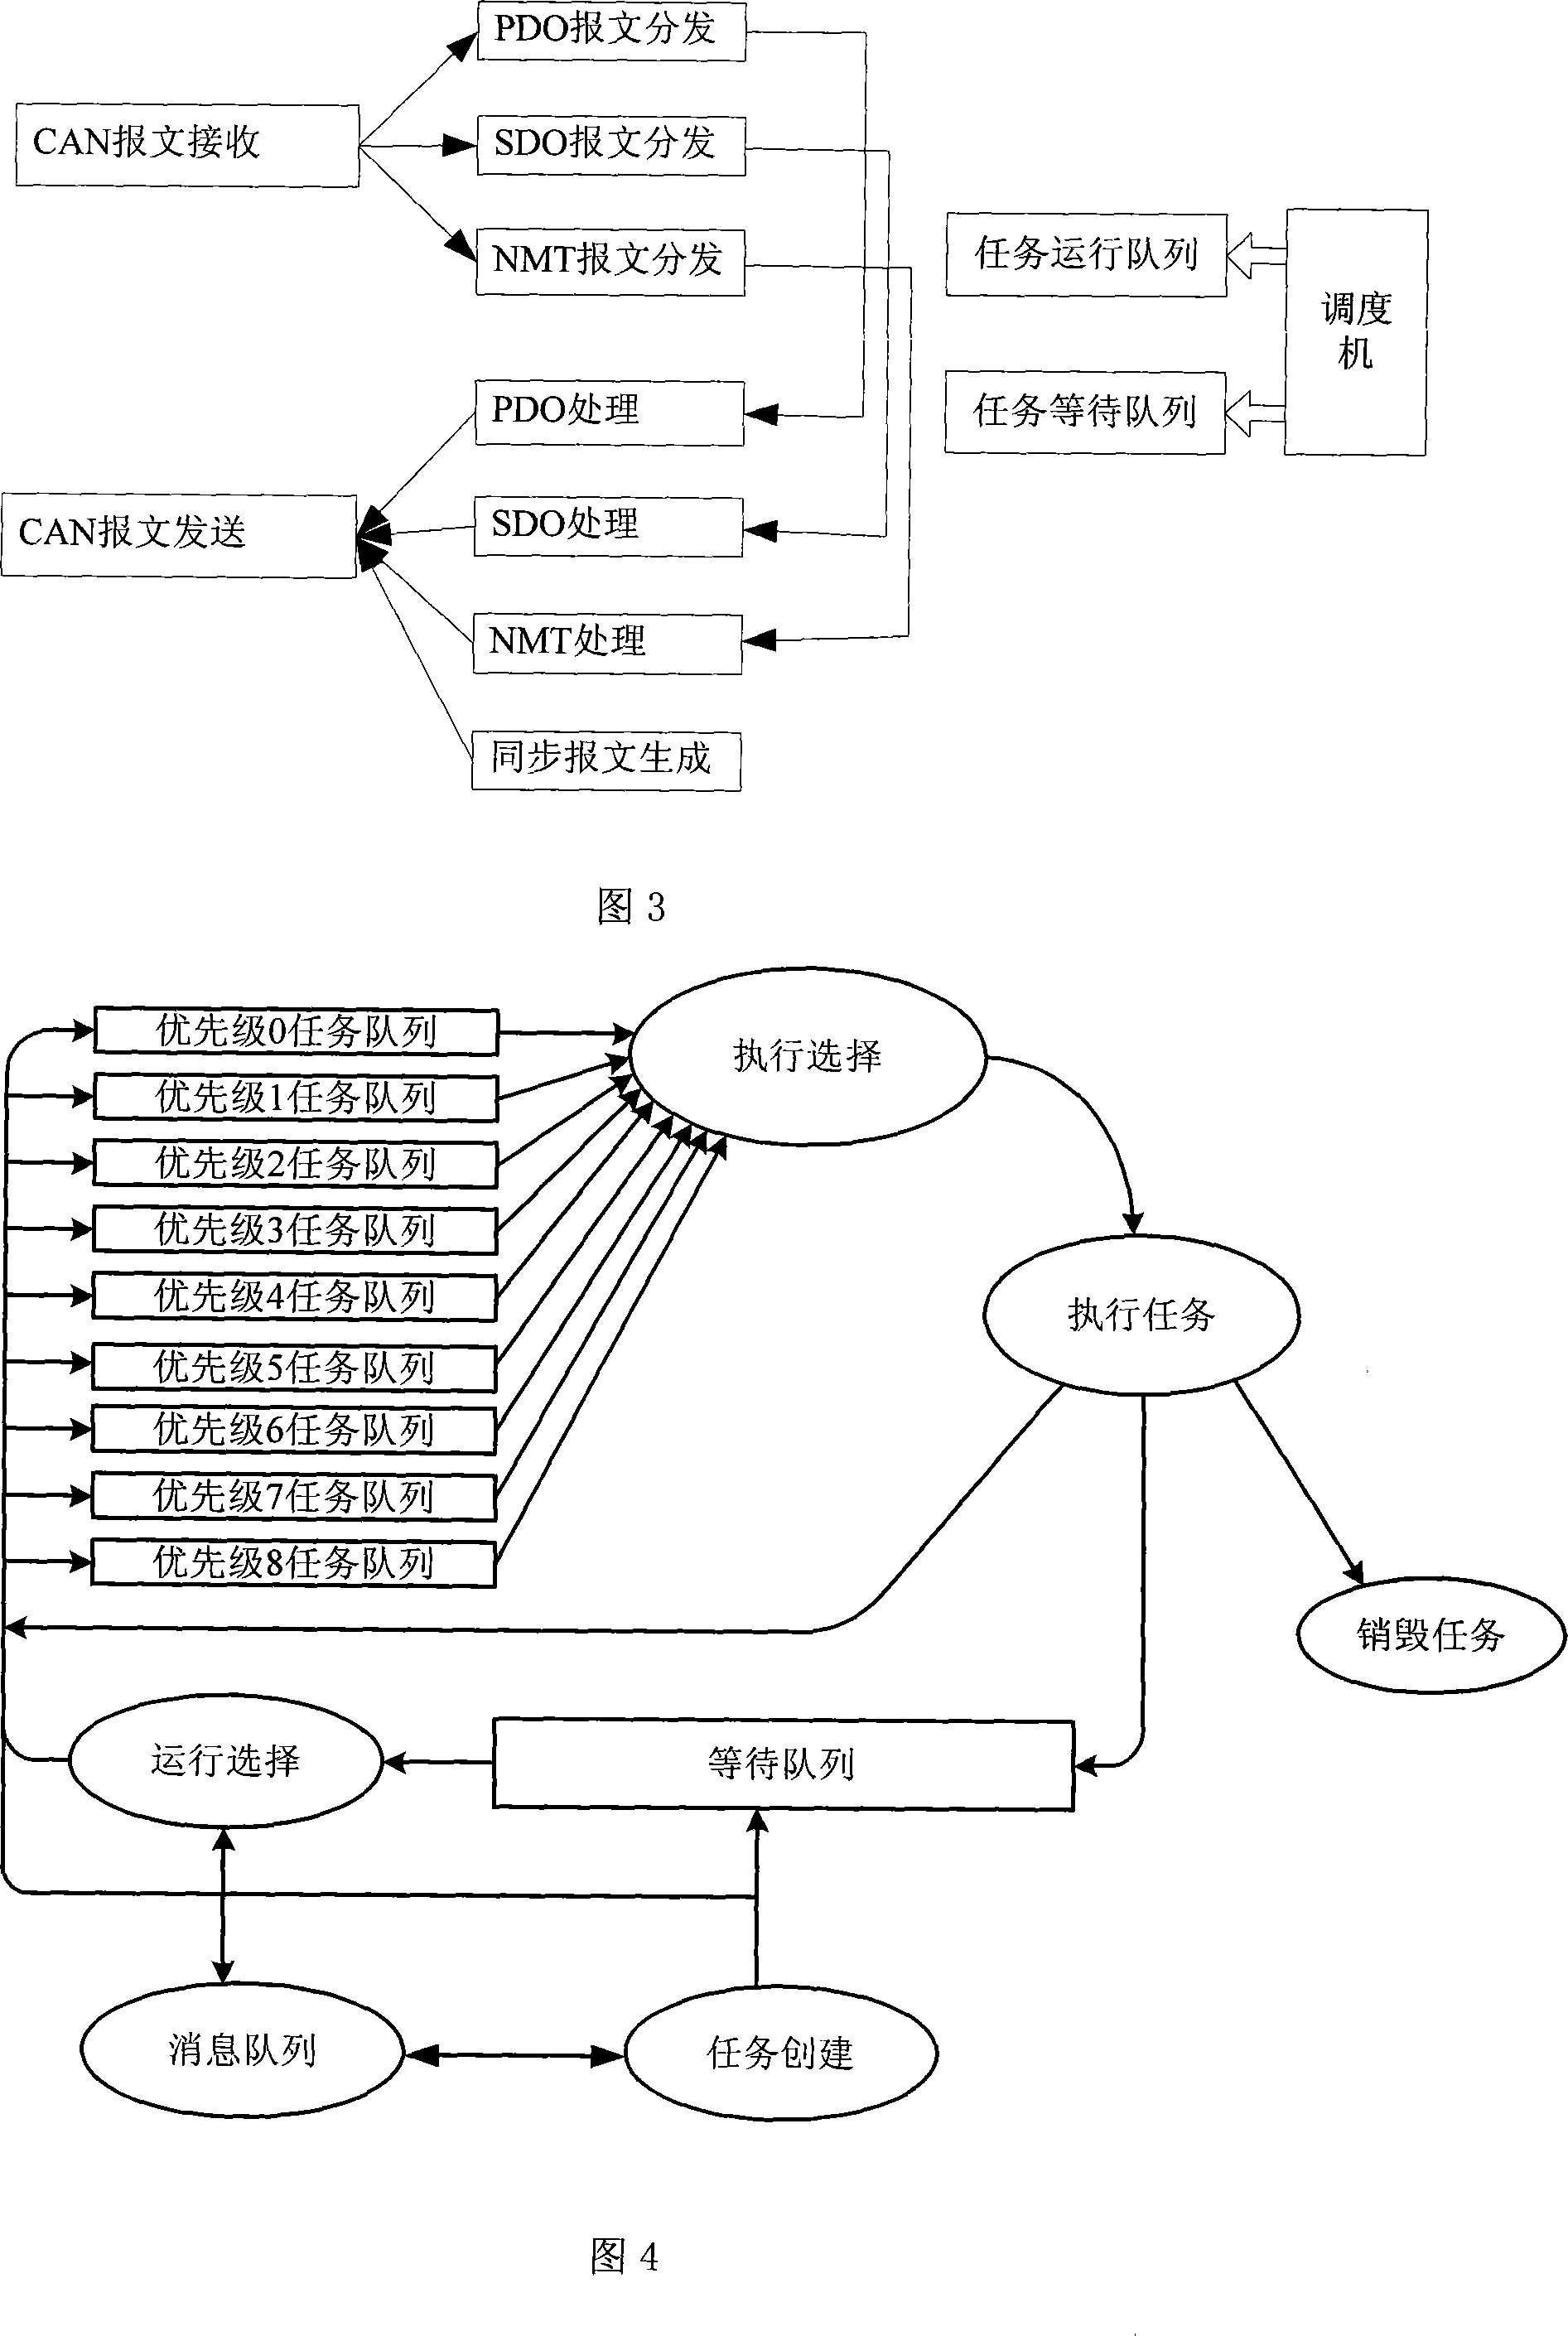 Method for implementing CANopen main station